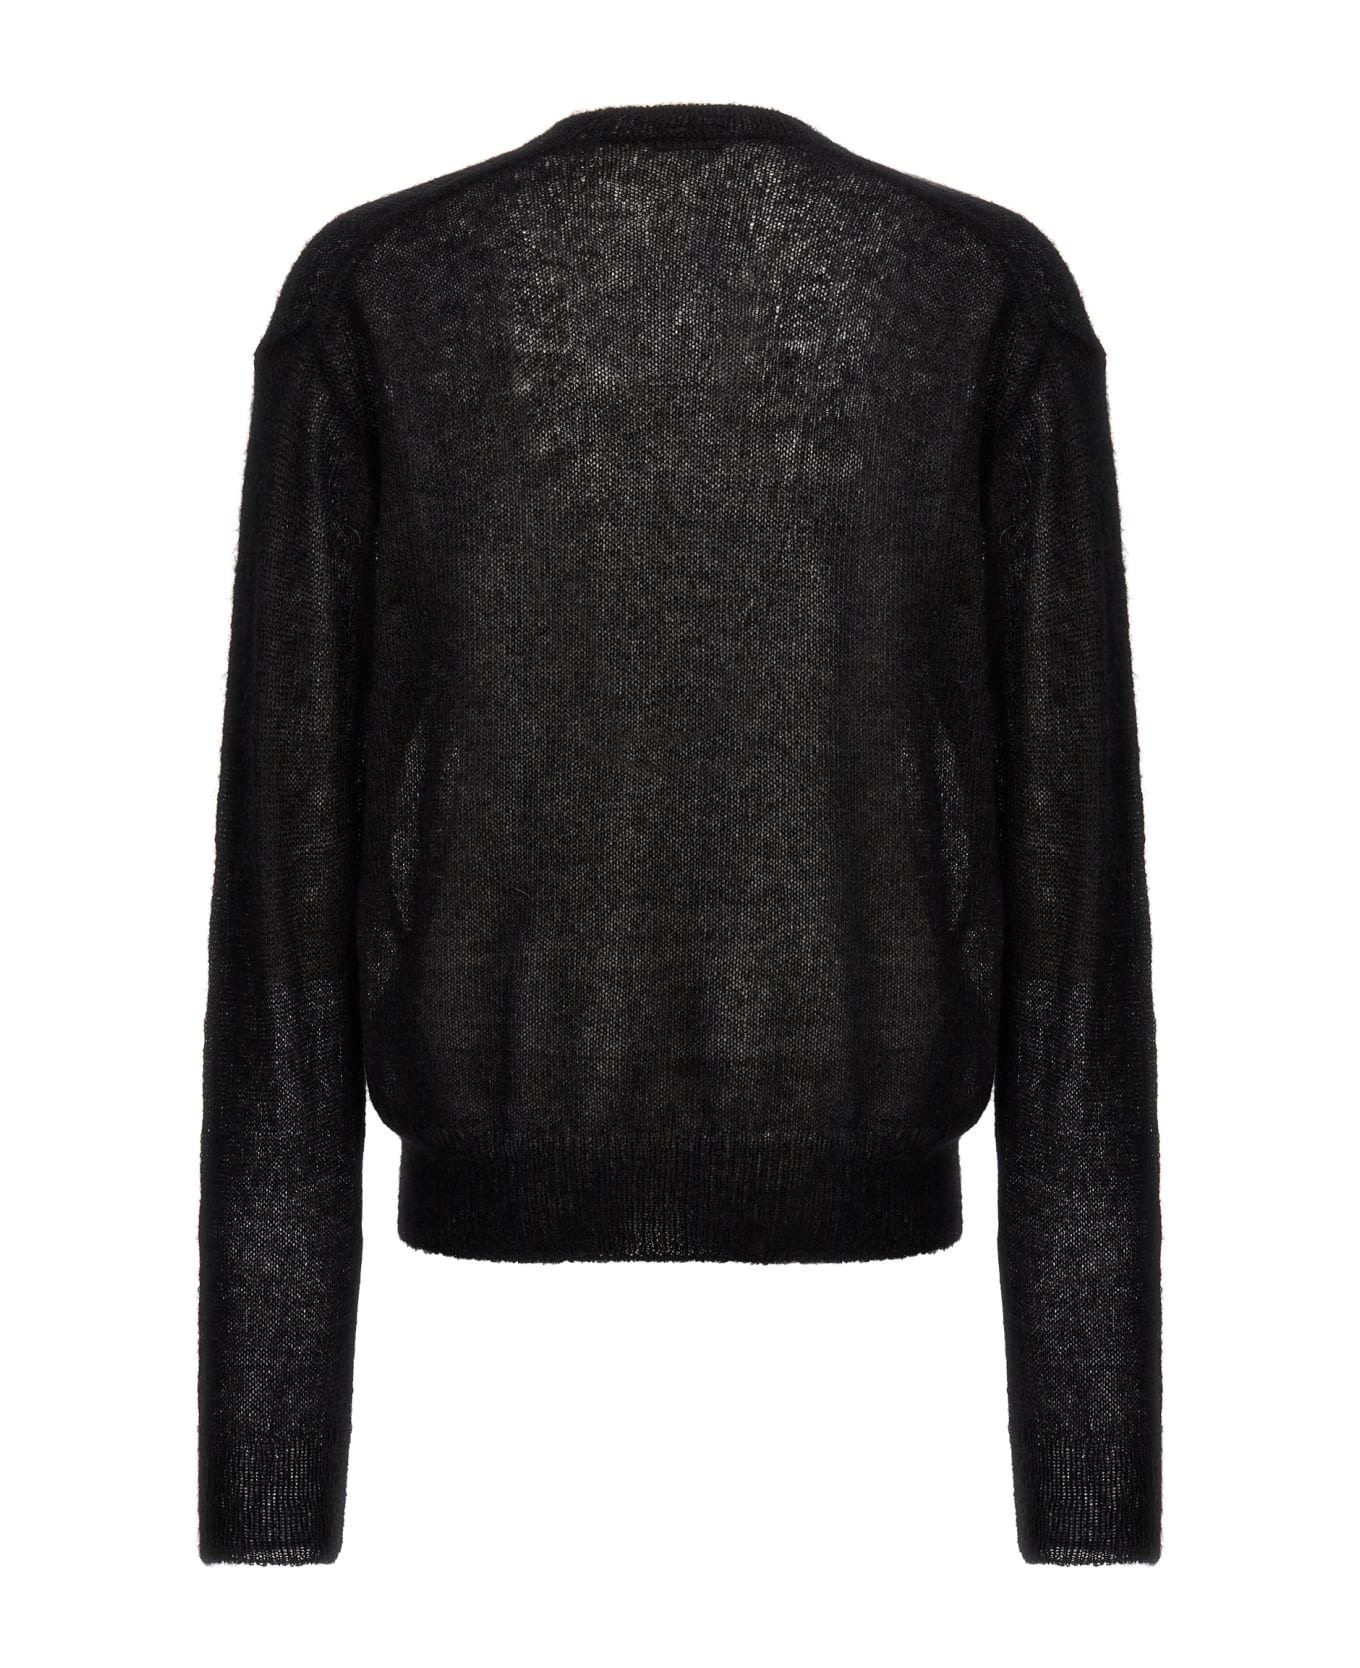 Tom Ford Mohair Sweater - Nero